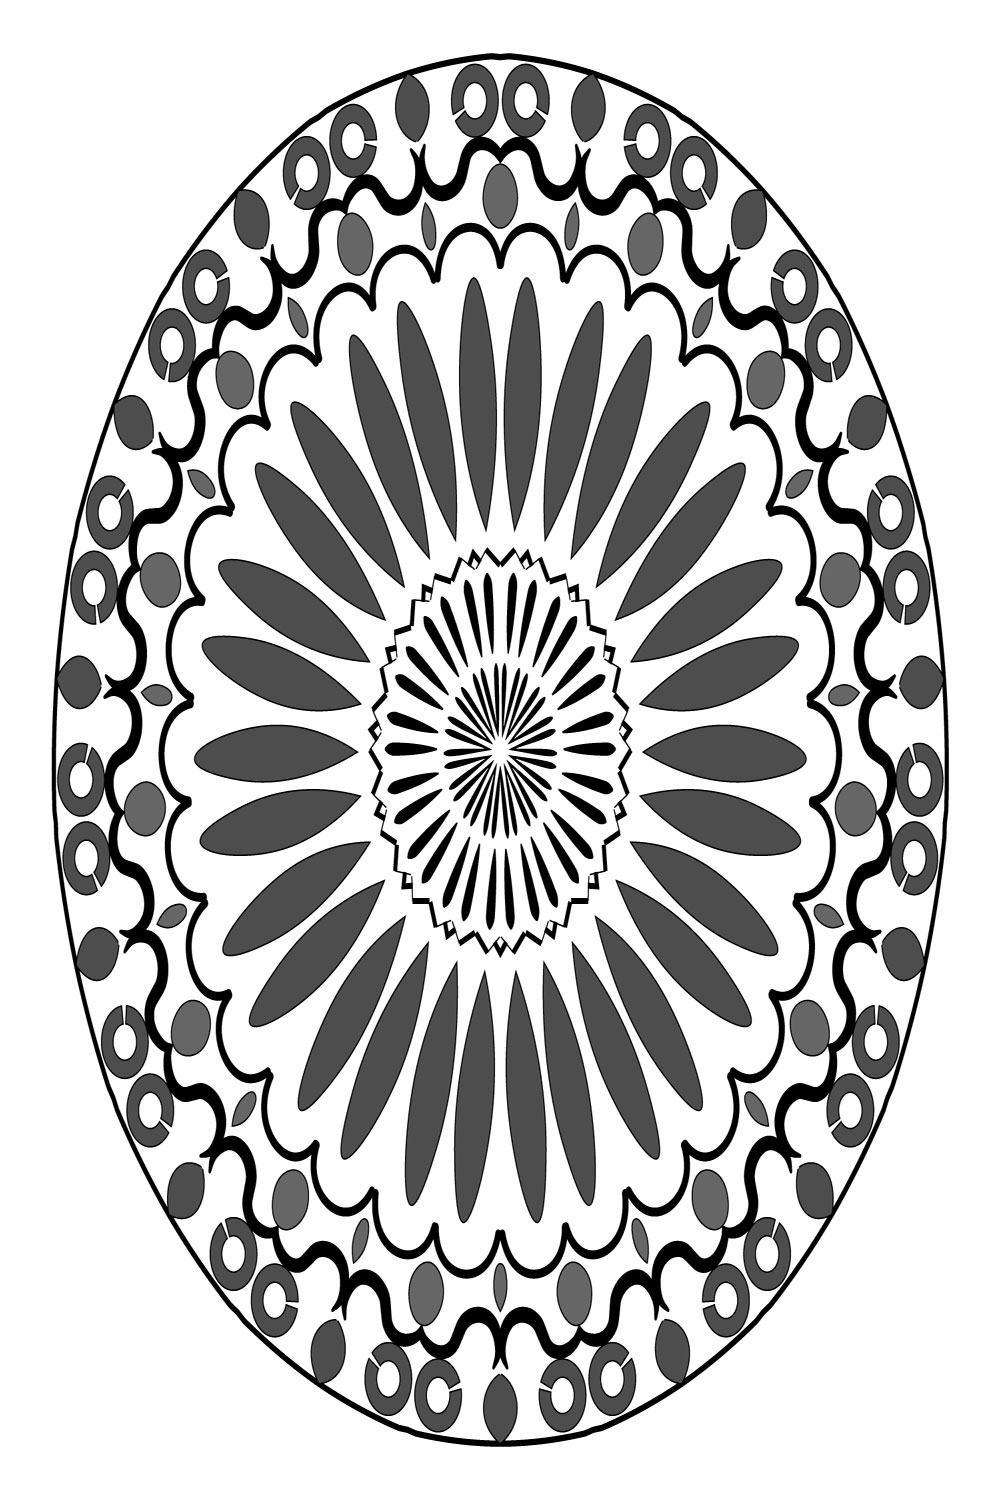 Mandala art with black and white rounded circles pinterest preview image.